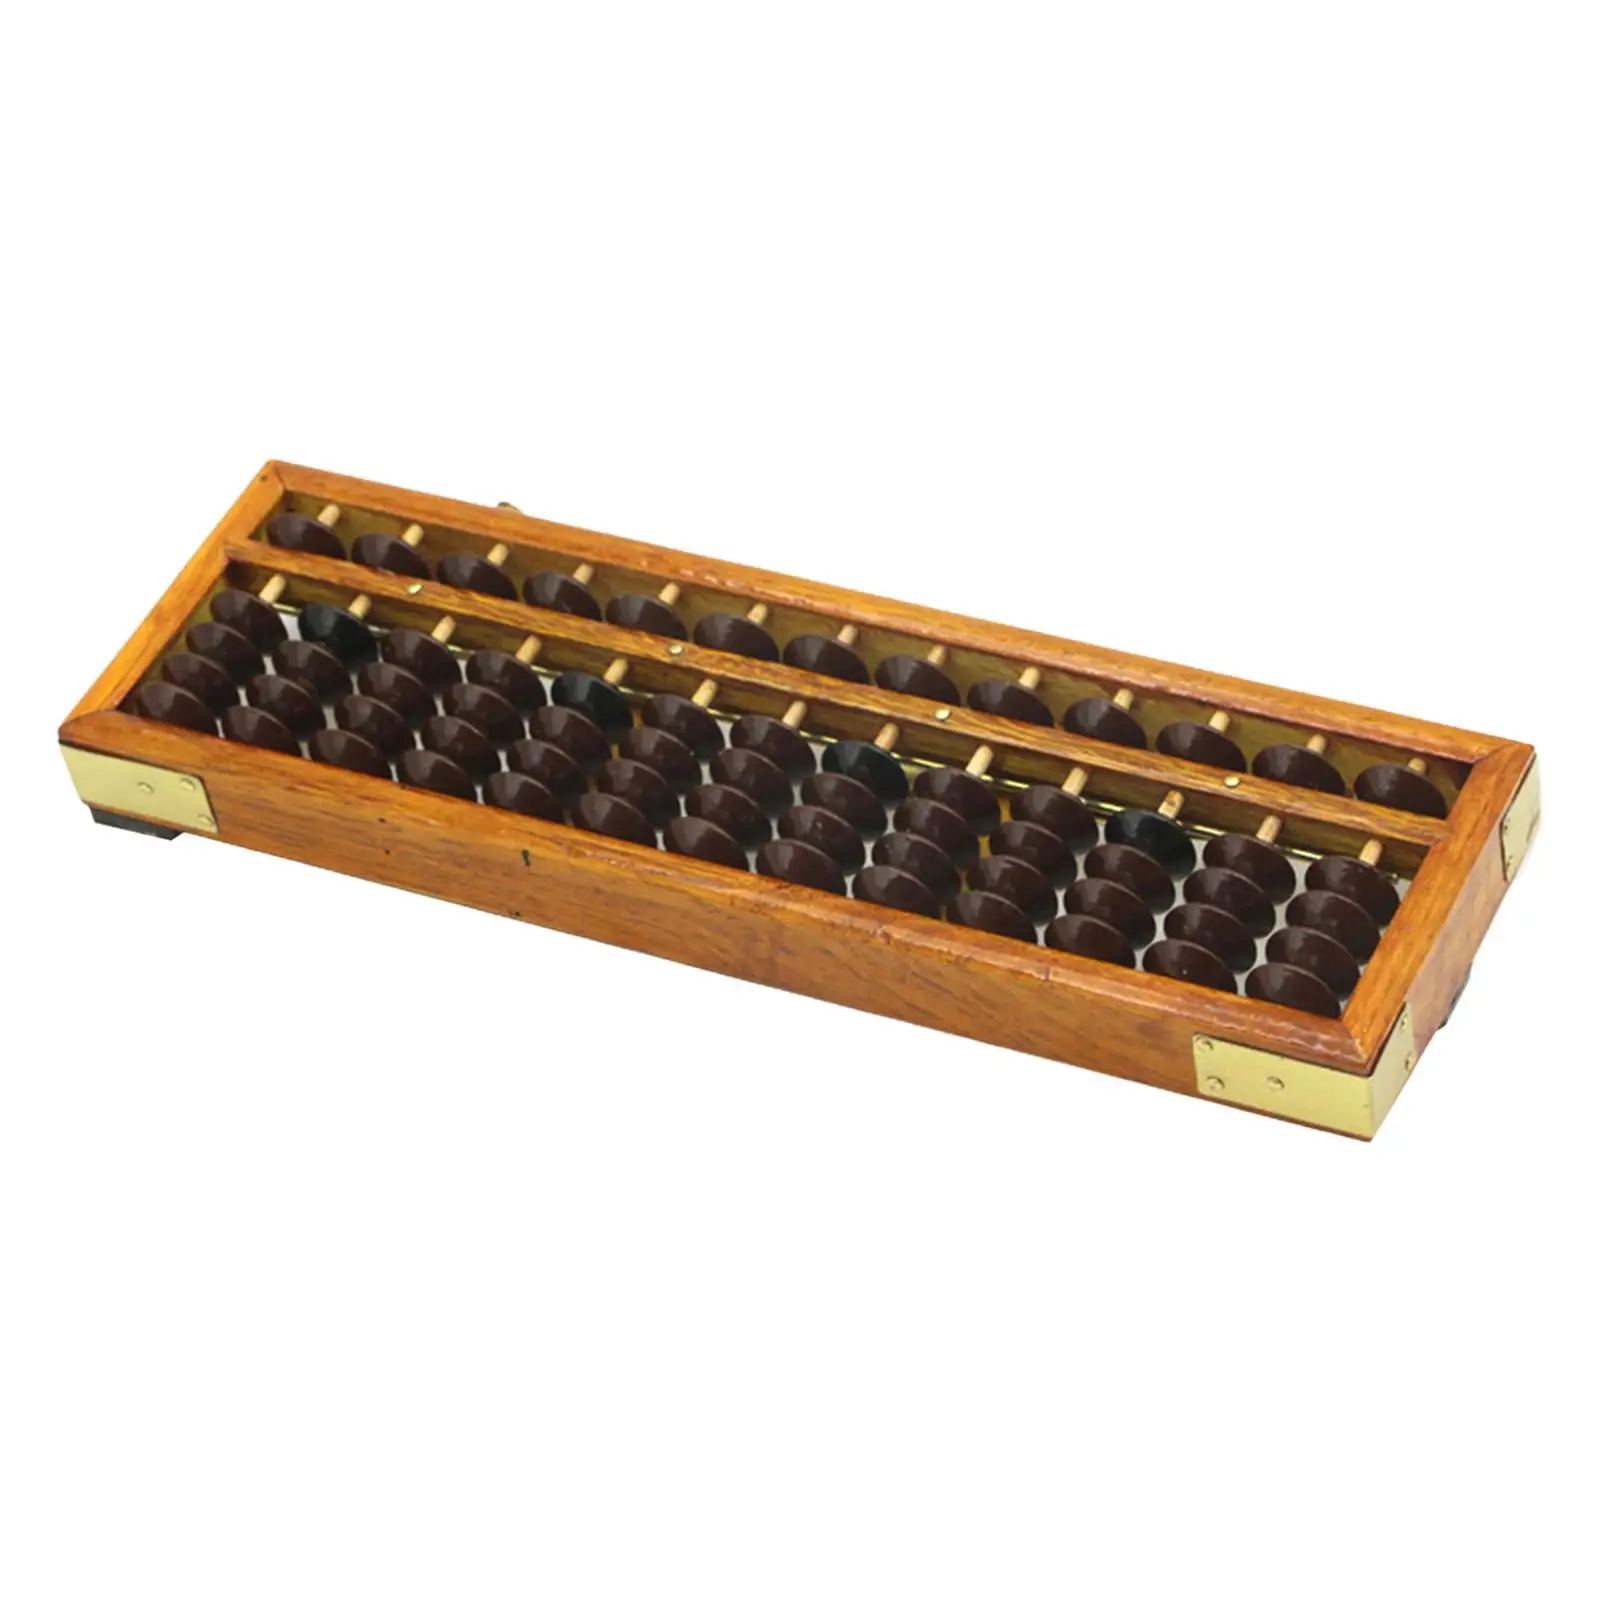 13 digits Rods Chinese Abacus Math Learning Counting Tool Counting Calculator Abacus Soroban for Adults Children Kids